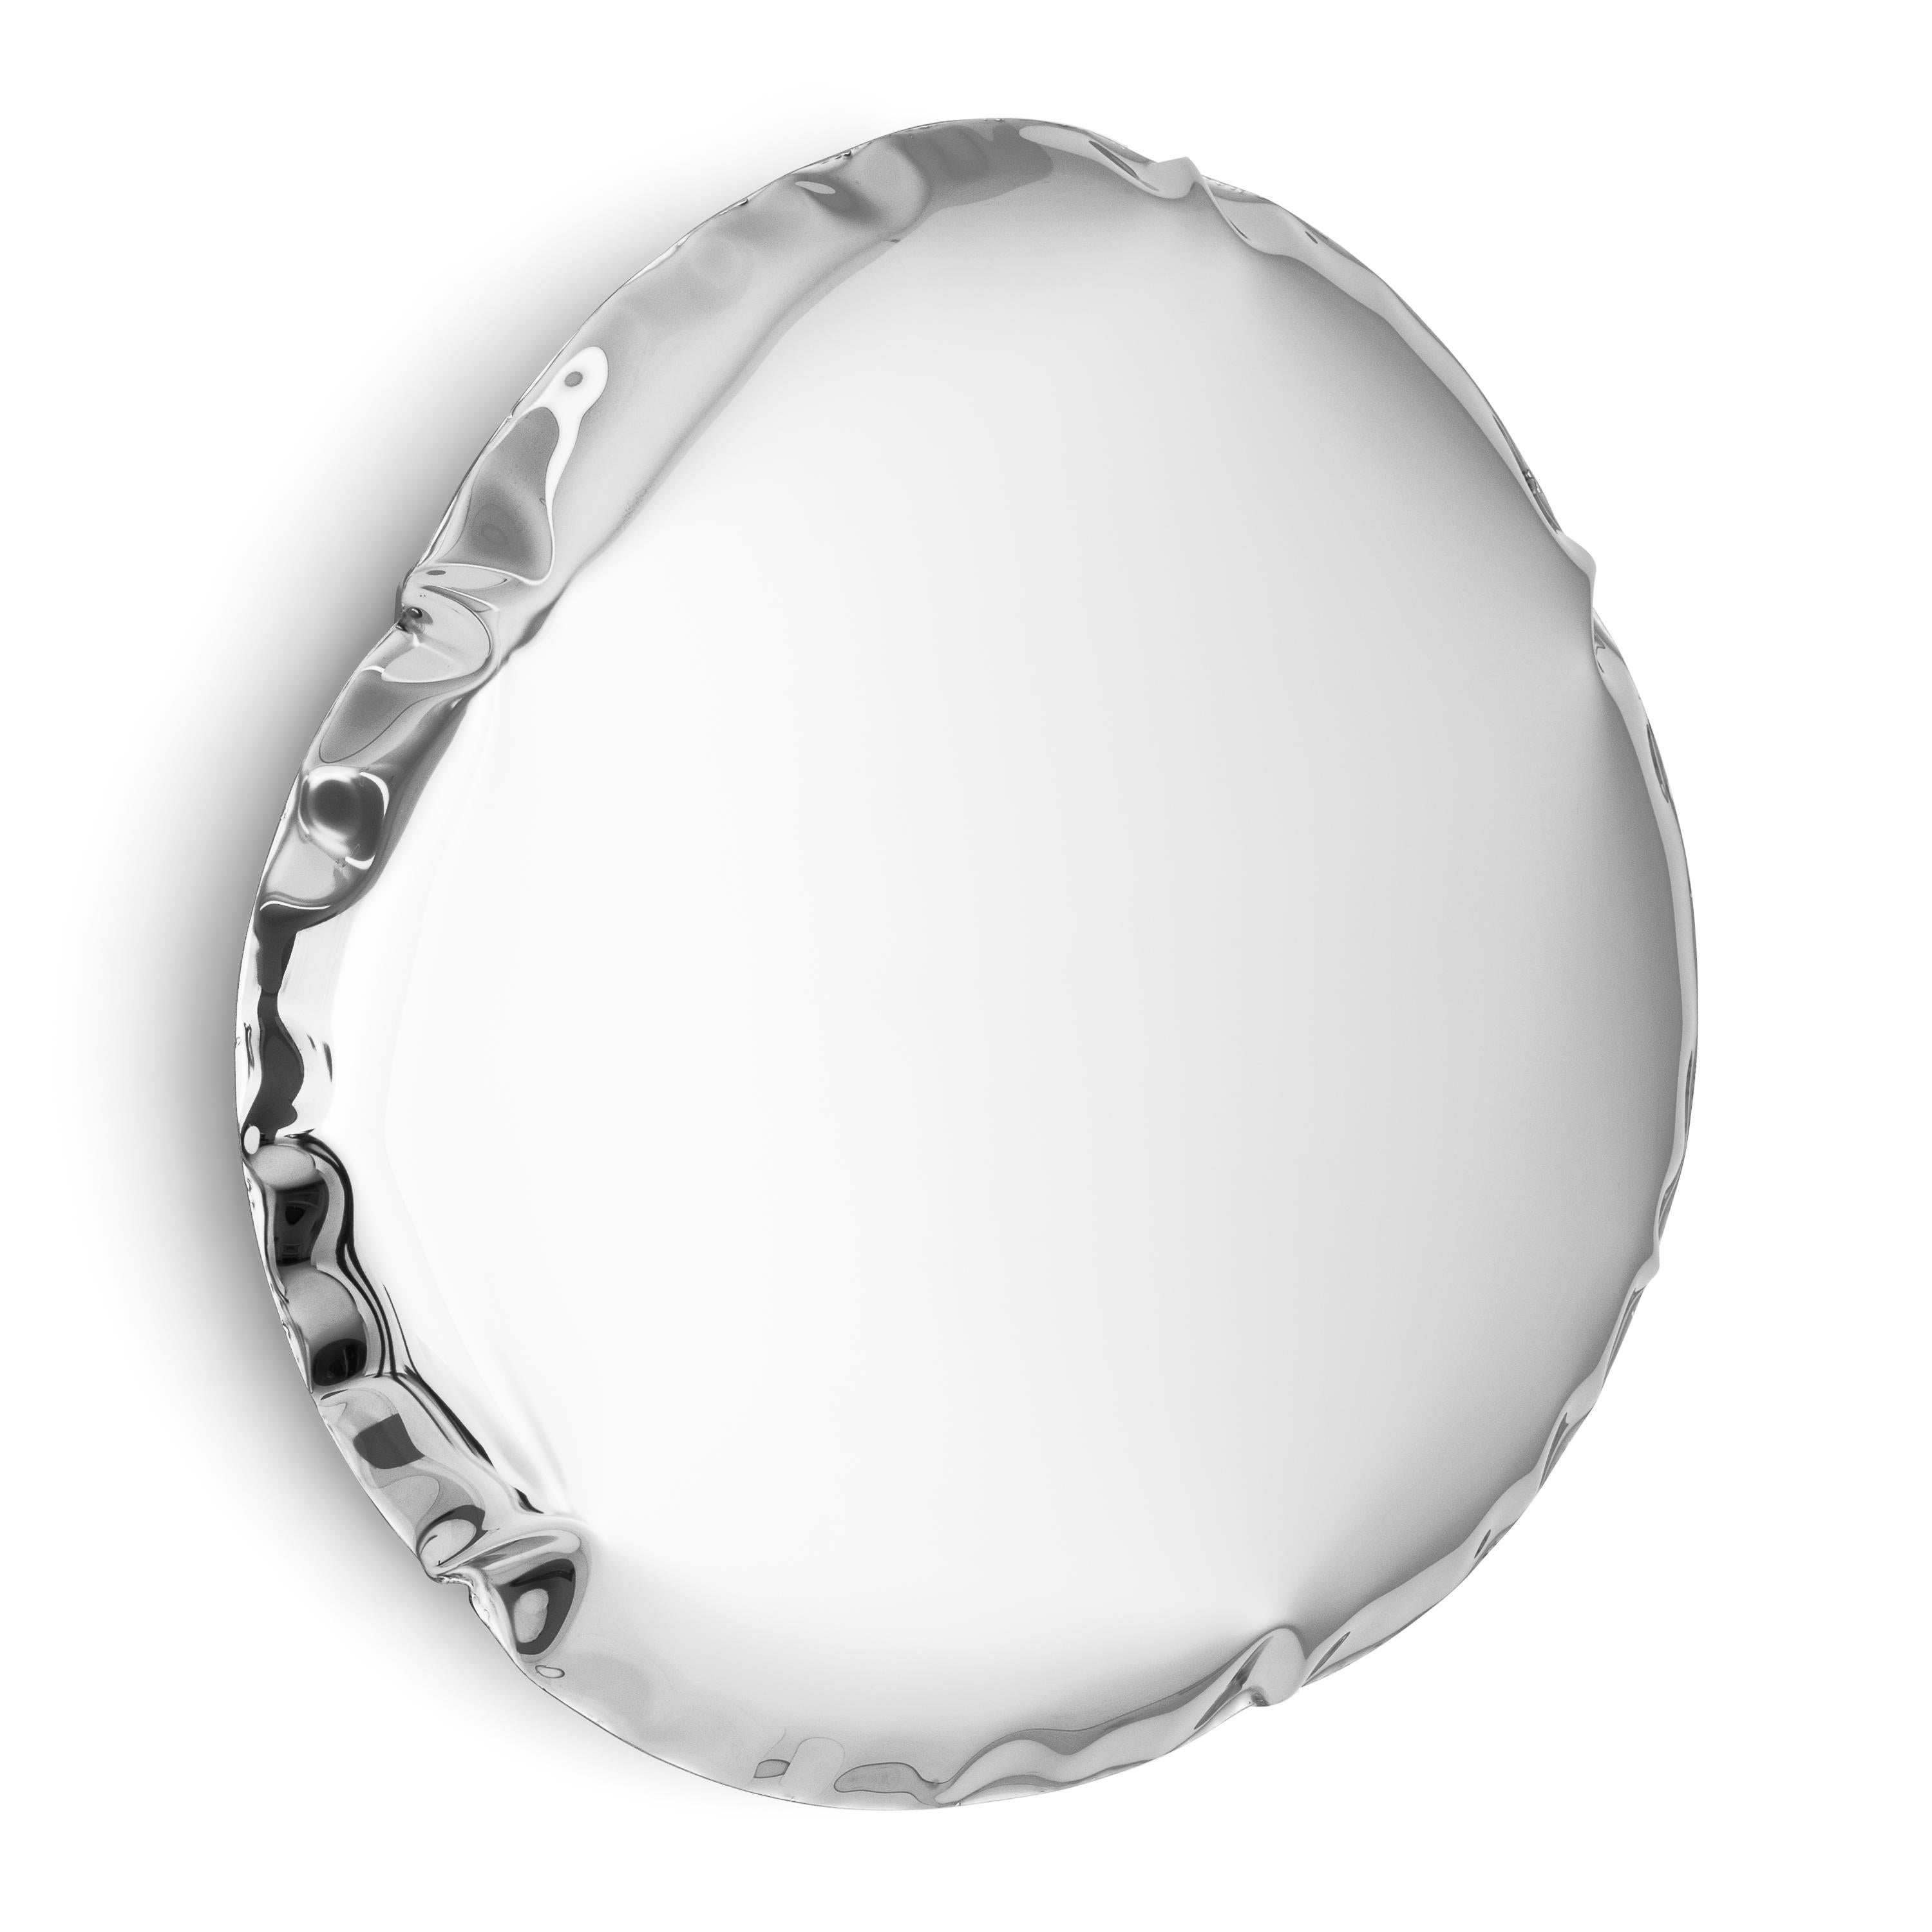 Stainless Steel Tafla O6 Wall Mirror by Zieta
Dimensions: D 6 x W 50 x H 55 cm 
Material: Stainless steel.
Finish: Polished.
Available finishes: Stainless Steel, White Matt, Sapphire/Emerald, Sapphire, Emerald, Deep space blue, Dark Matte, or Red